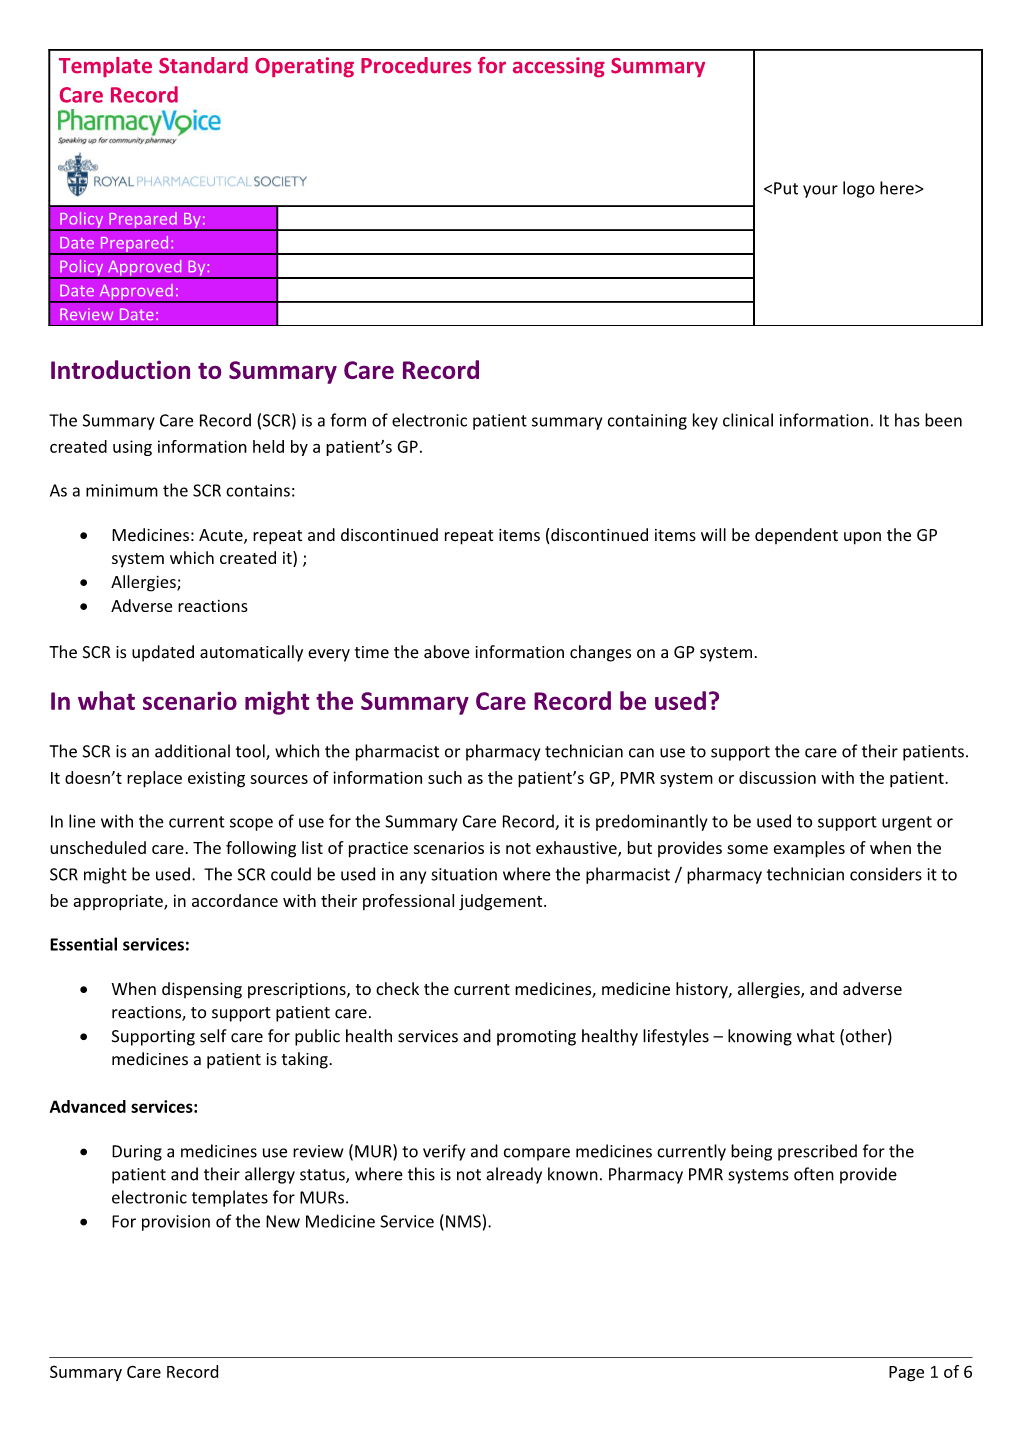 Introduction to Summary Care Record